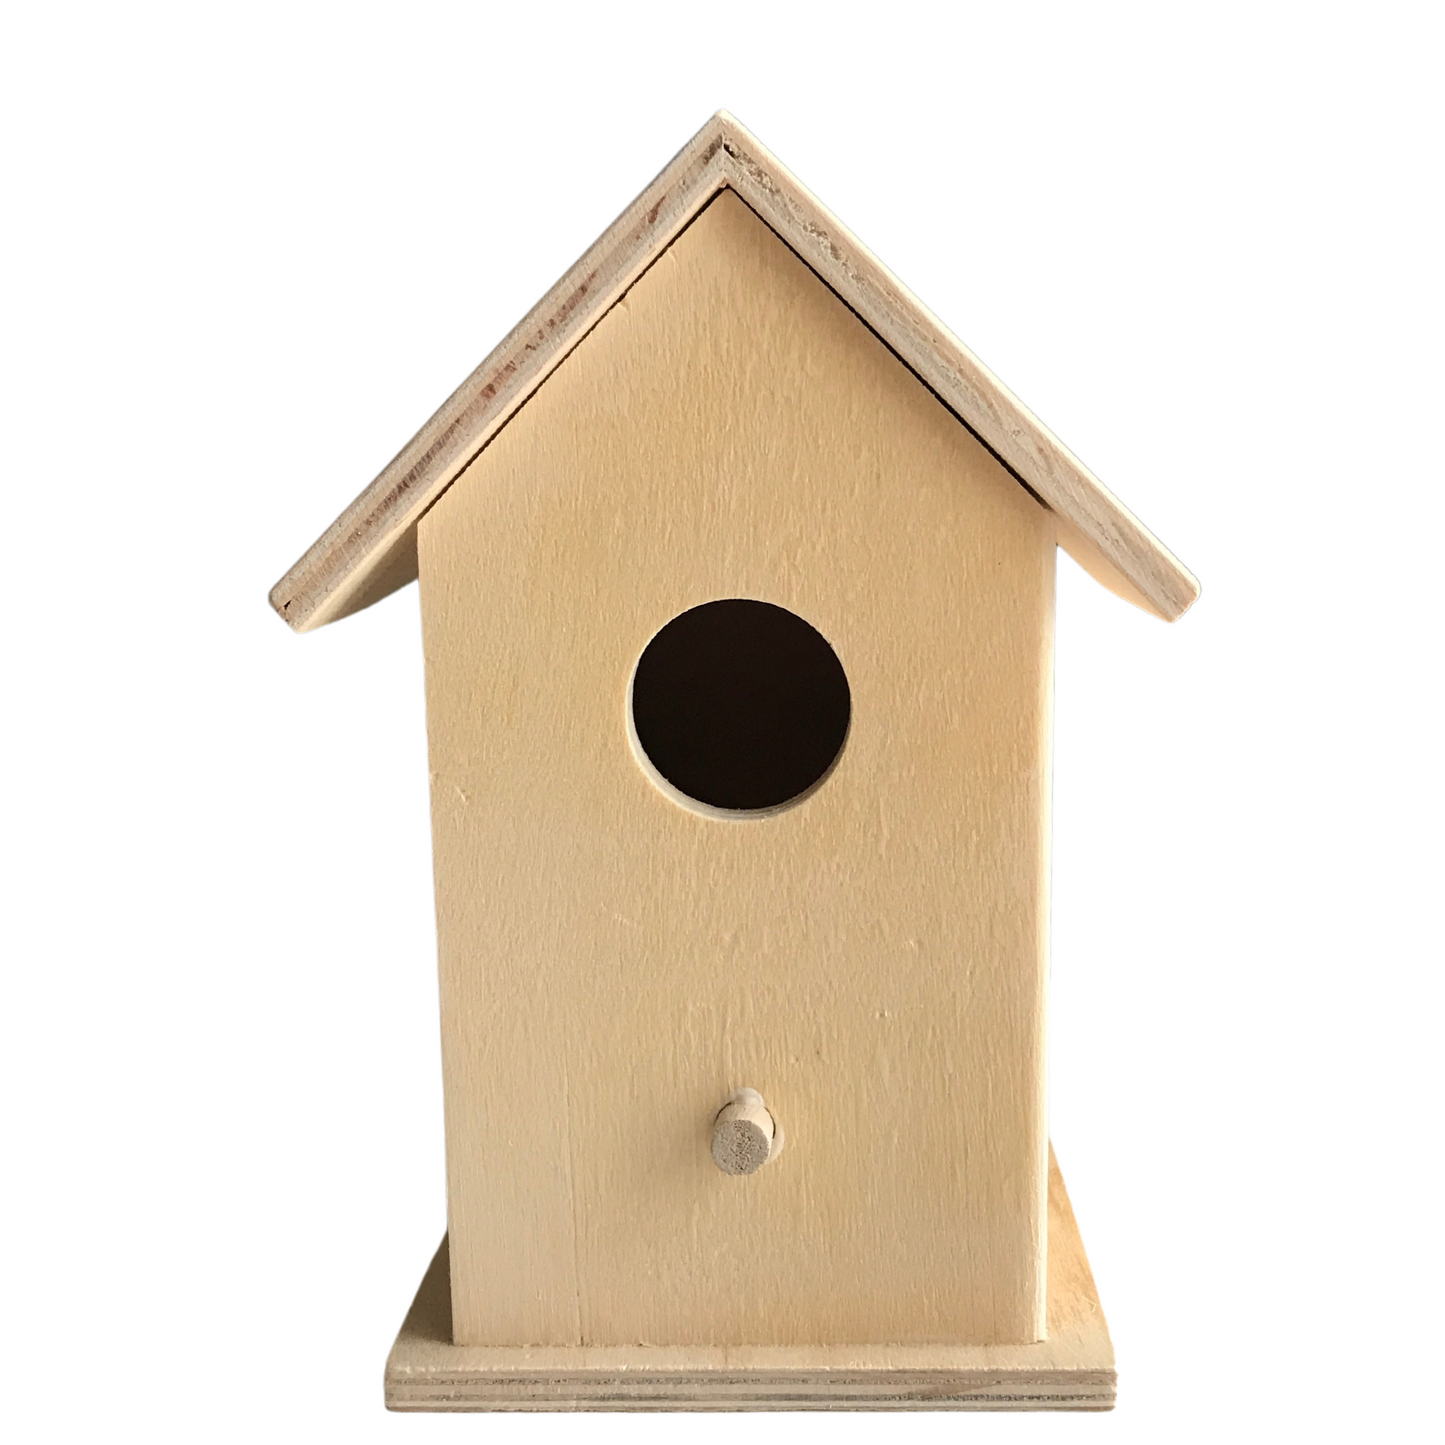 Bird house - kindergarten "We flew out" - farewell gift for educators - personalized with children's names